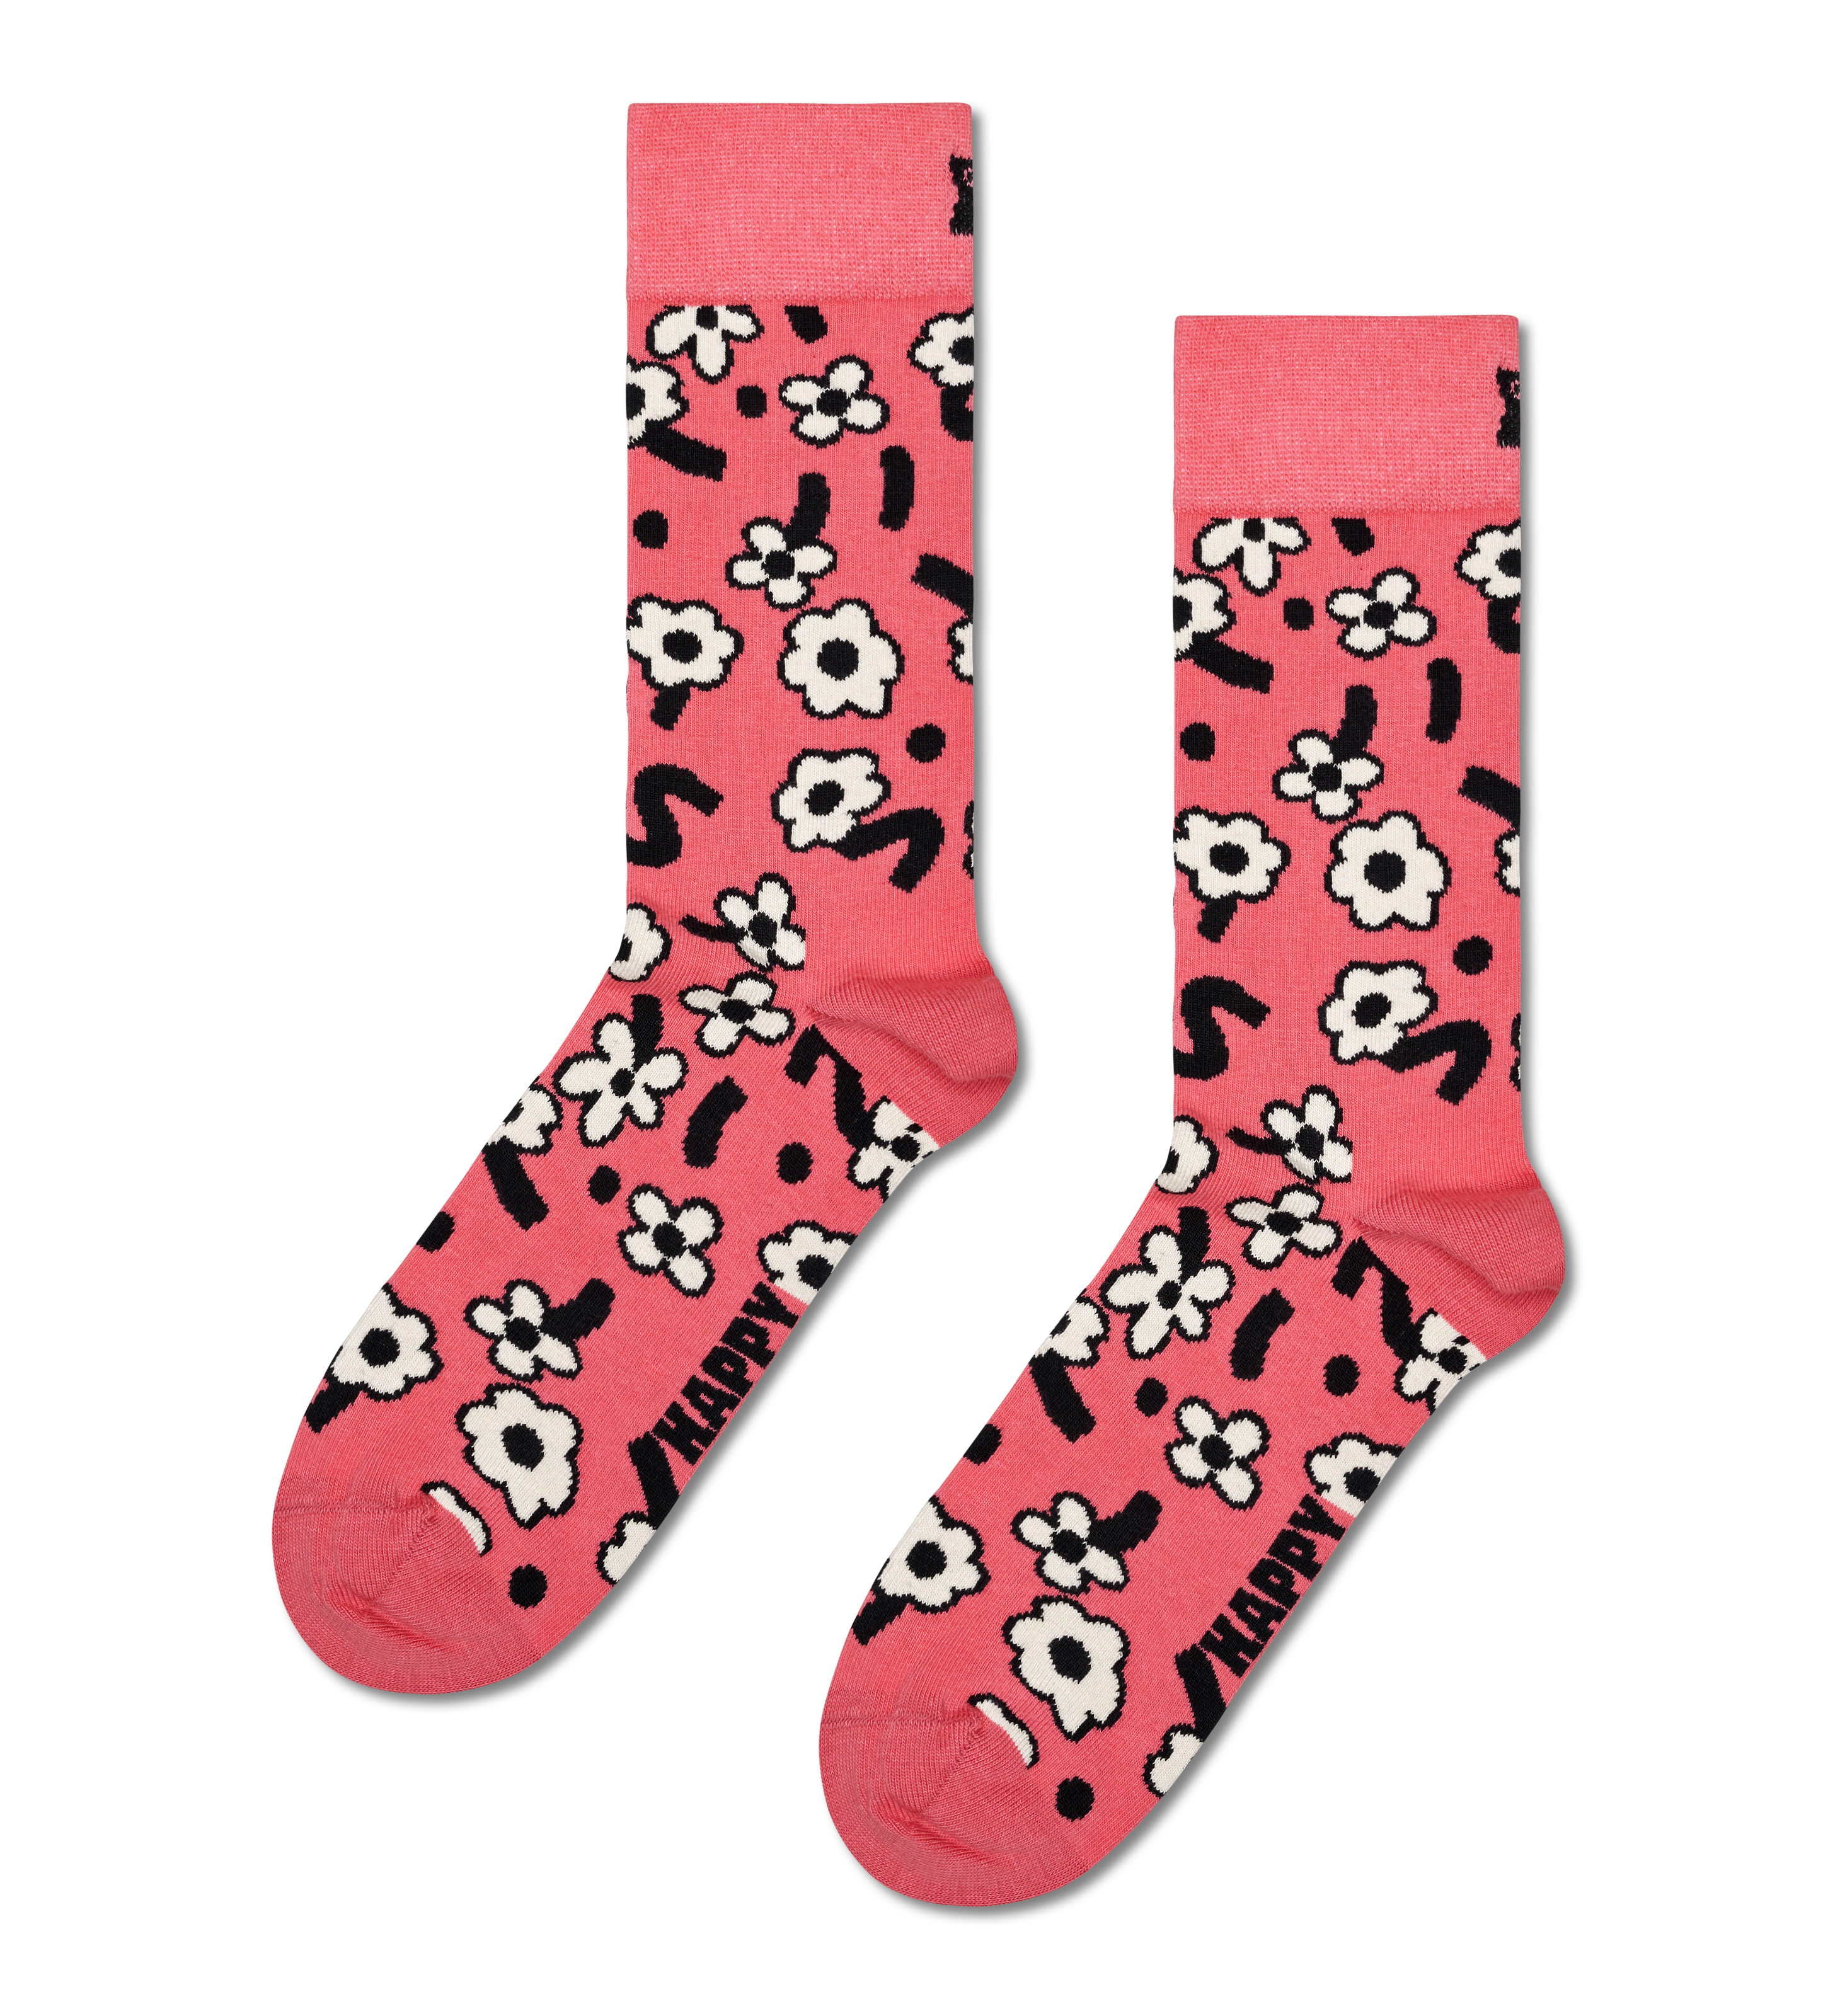  Happy Socks for Men and Women, 1 Pair, Colorful, Fun, Unique,  Food Themed Printed Patterns